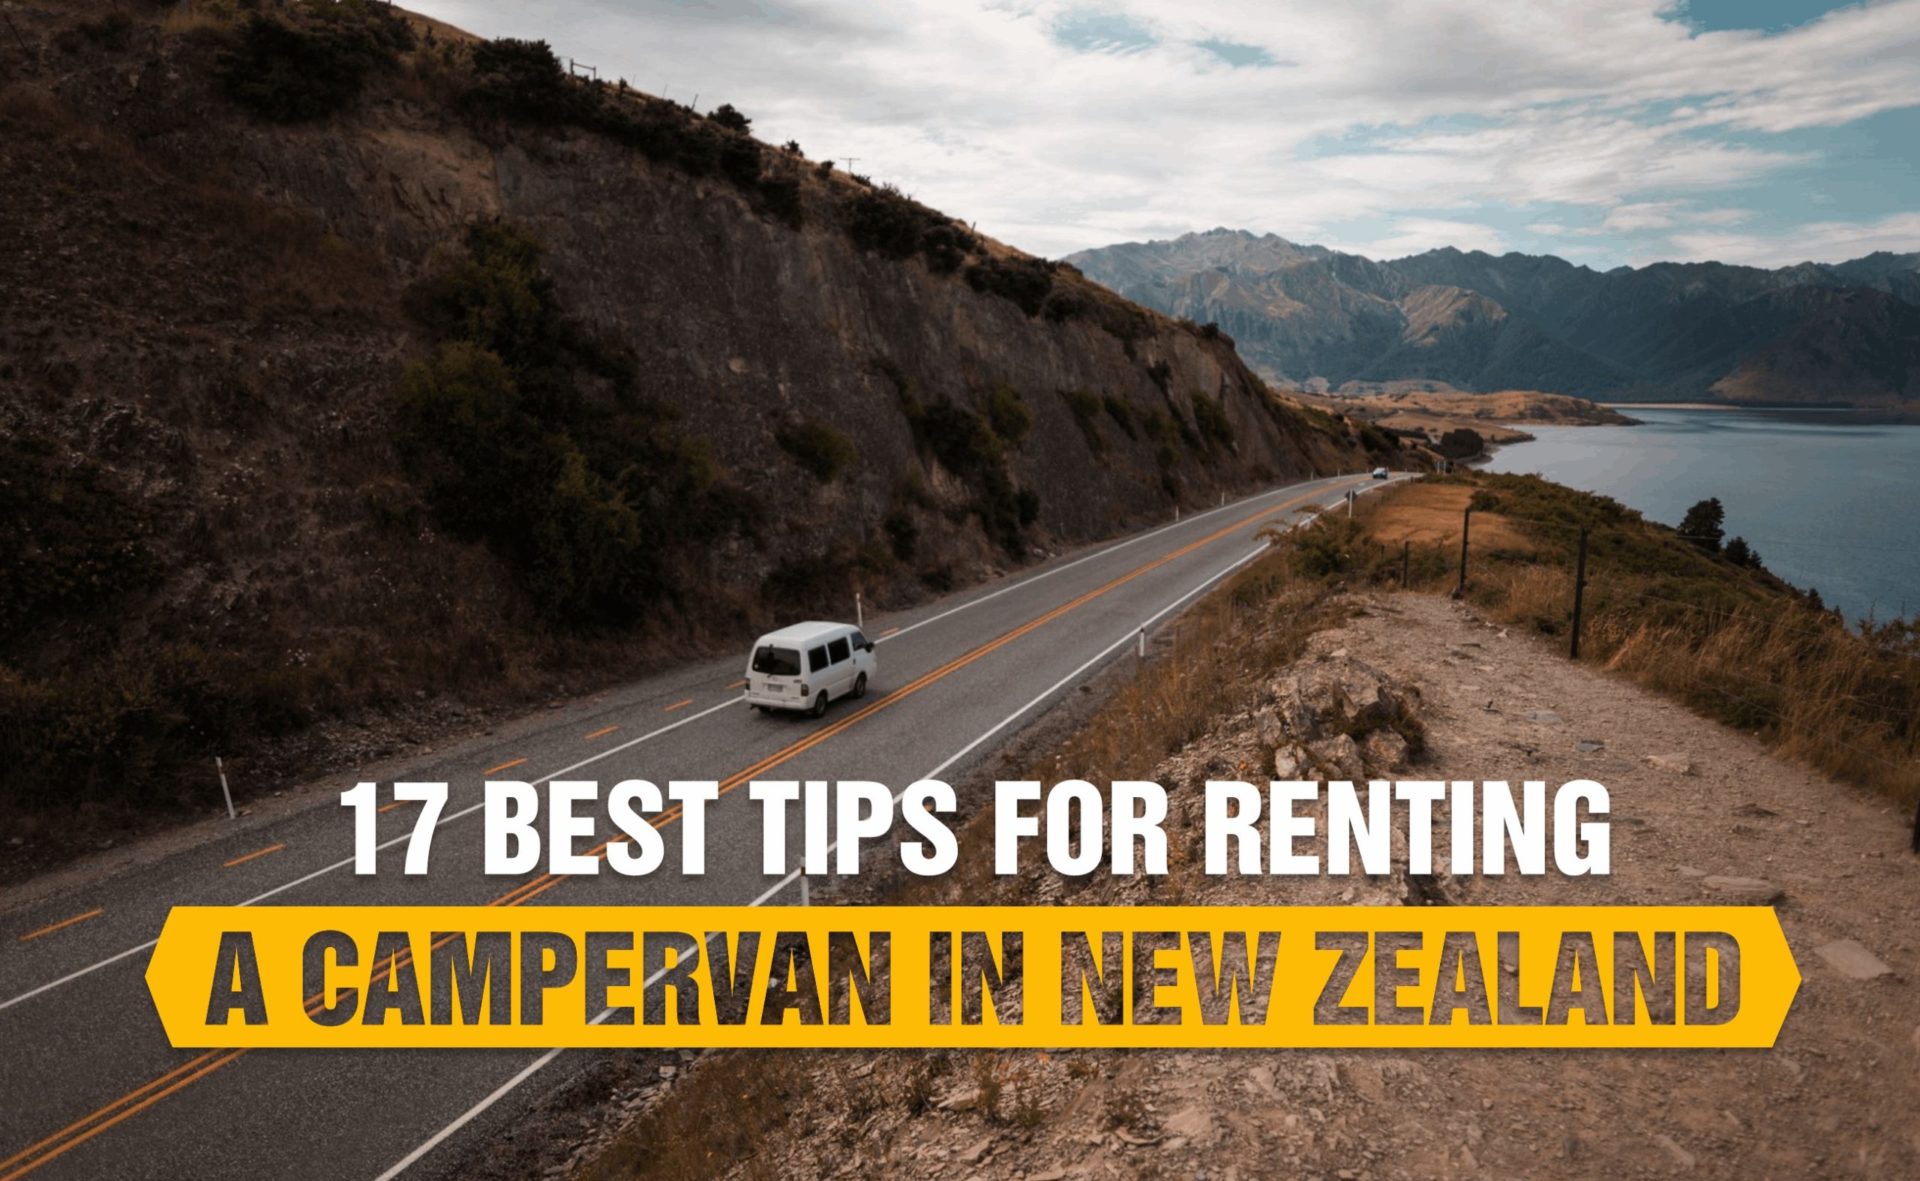 Best tips for renting a campervan in New Zealand